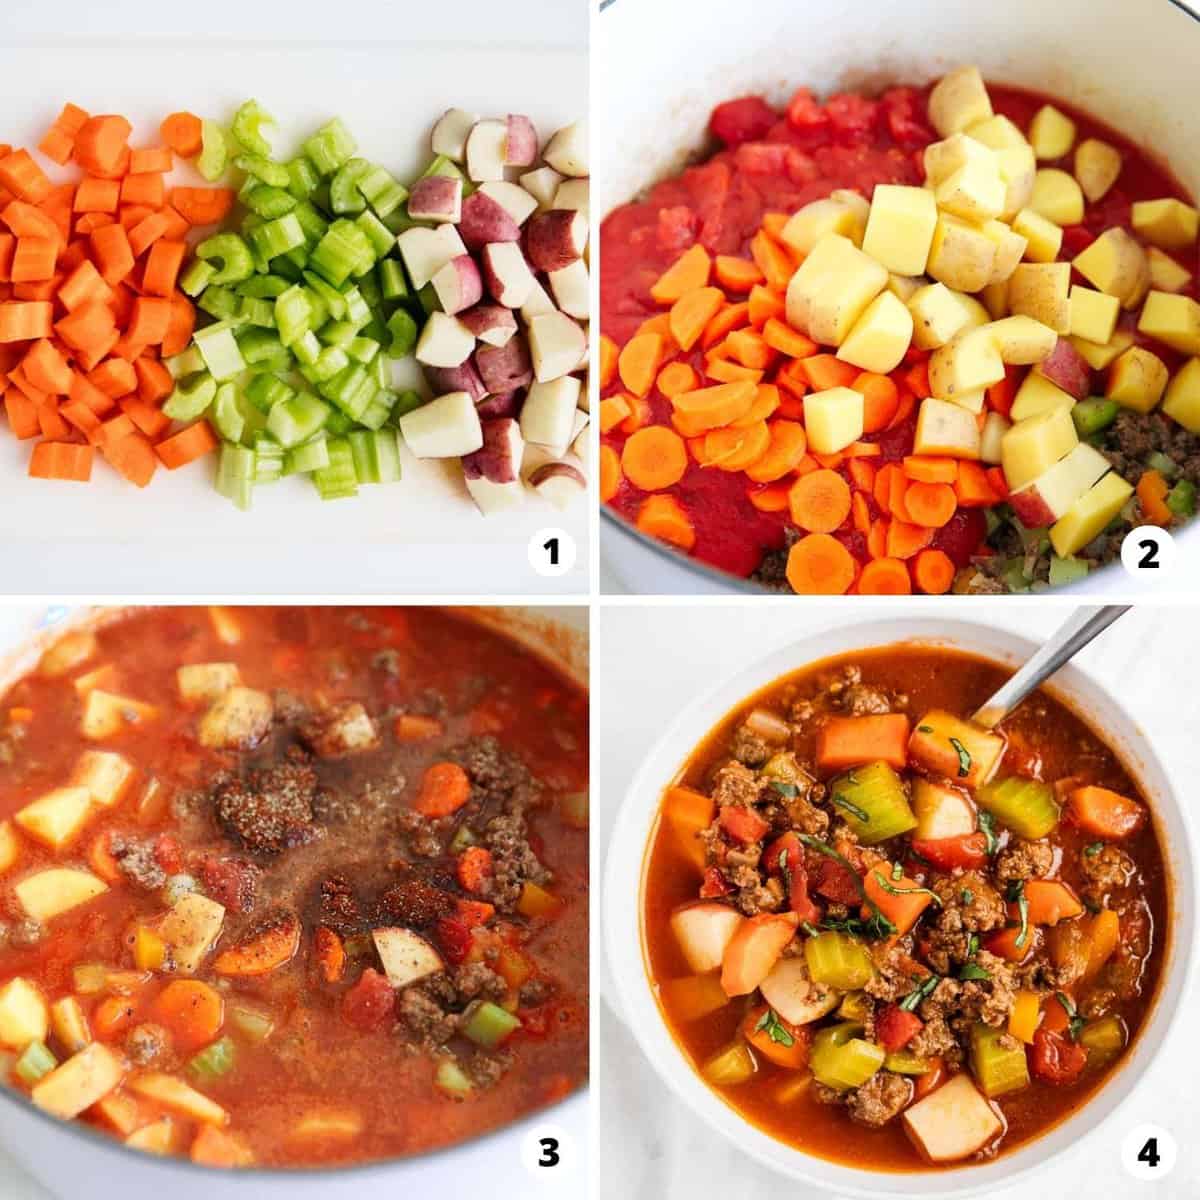 Showing how to make vegetable beef soup in a 4 step collage.